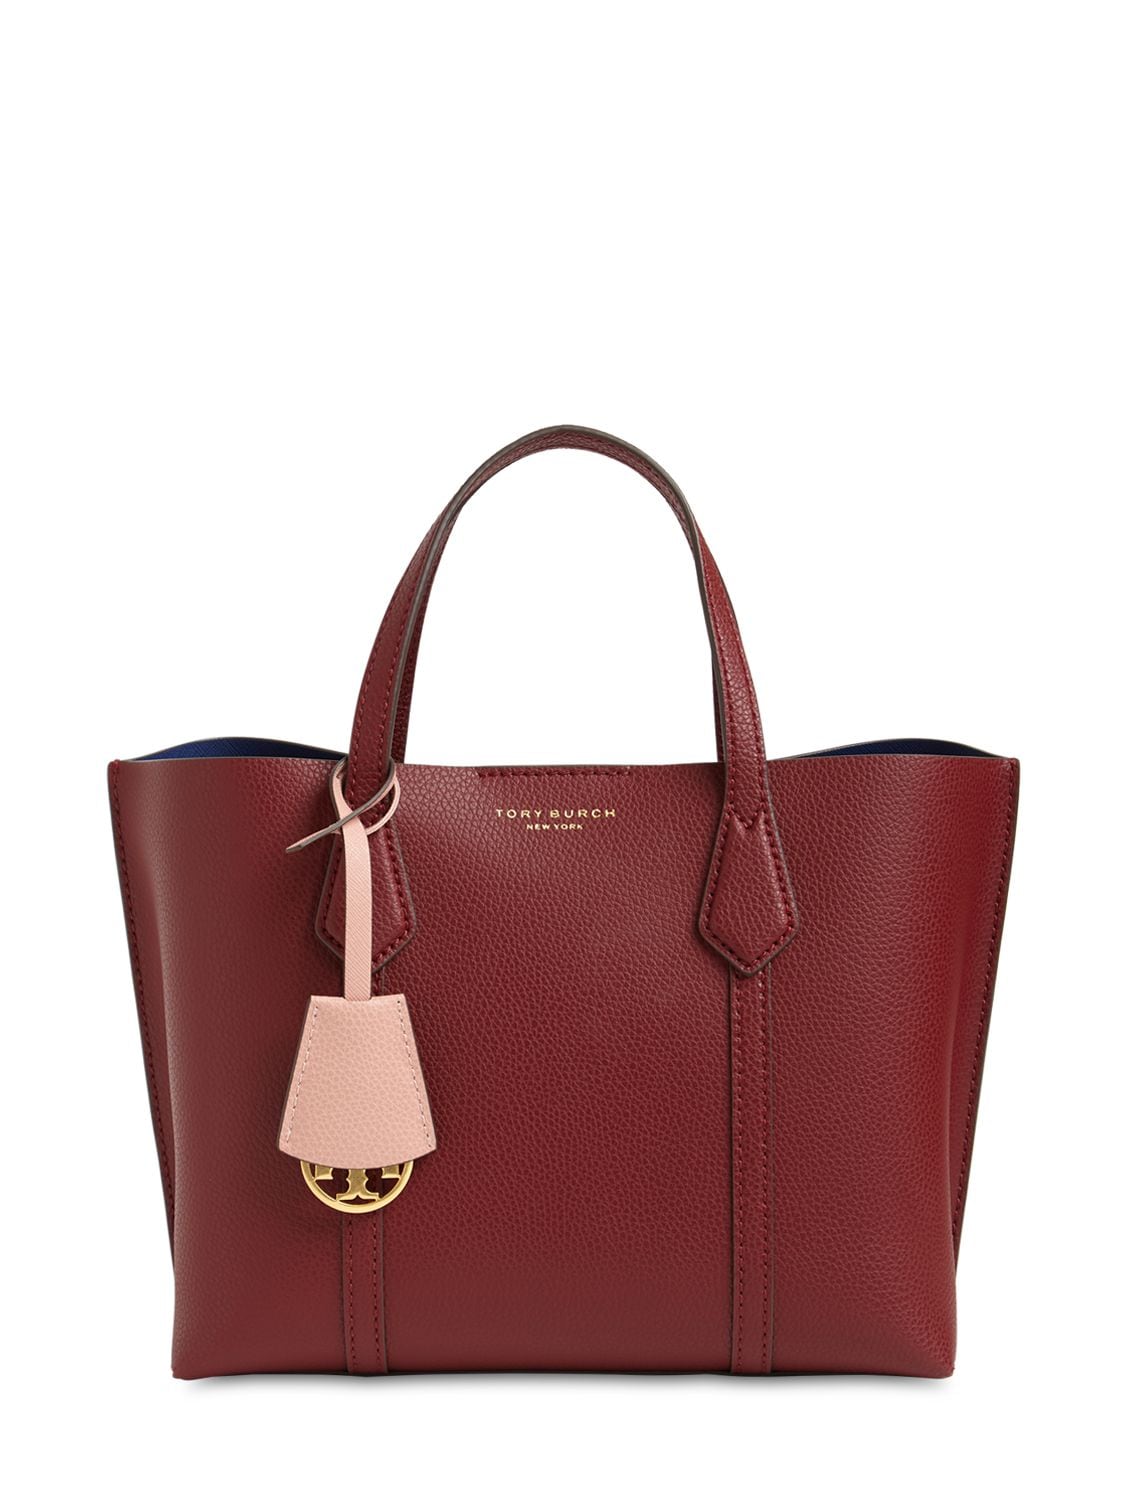 Tory Burch Small Perry Leather Tote Bag In Tinto